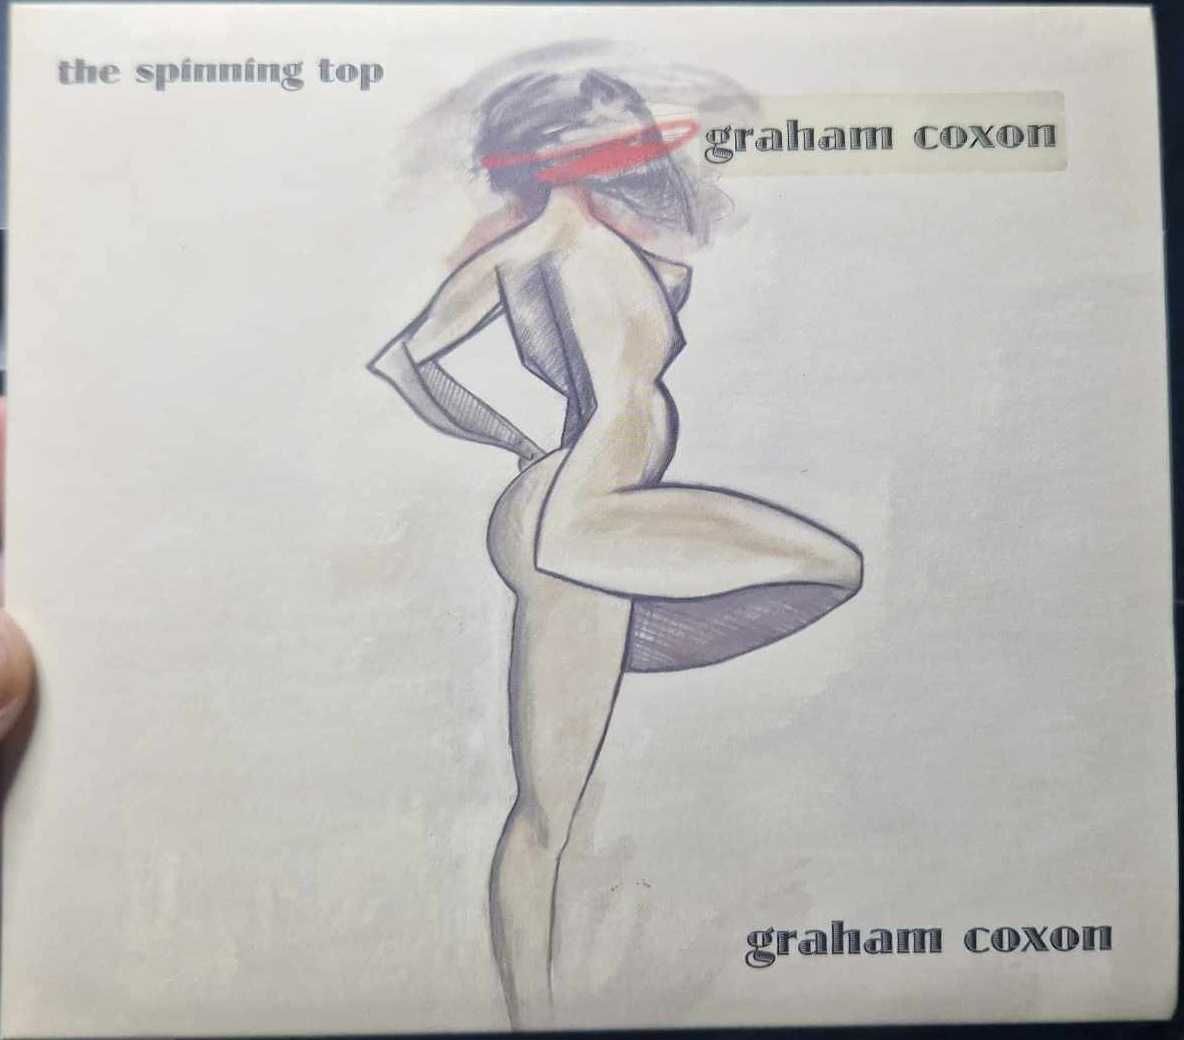 Graham Coxon – The Spinning Top - CD